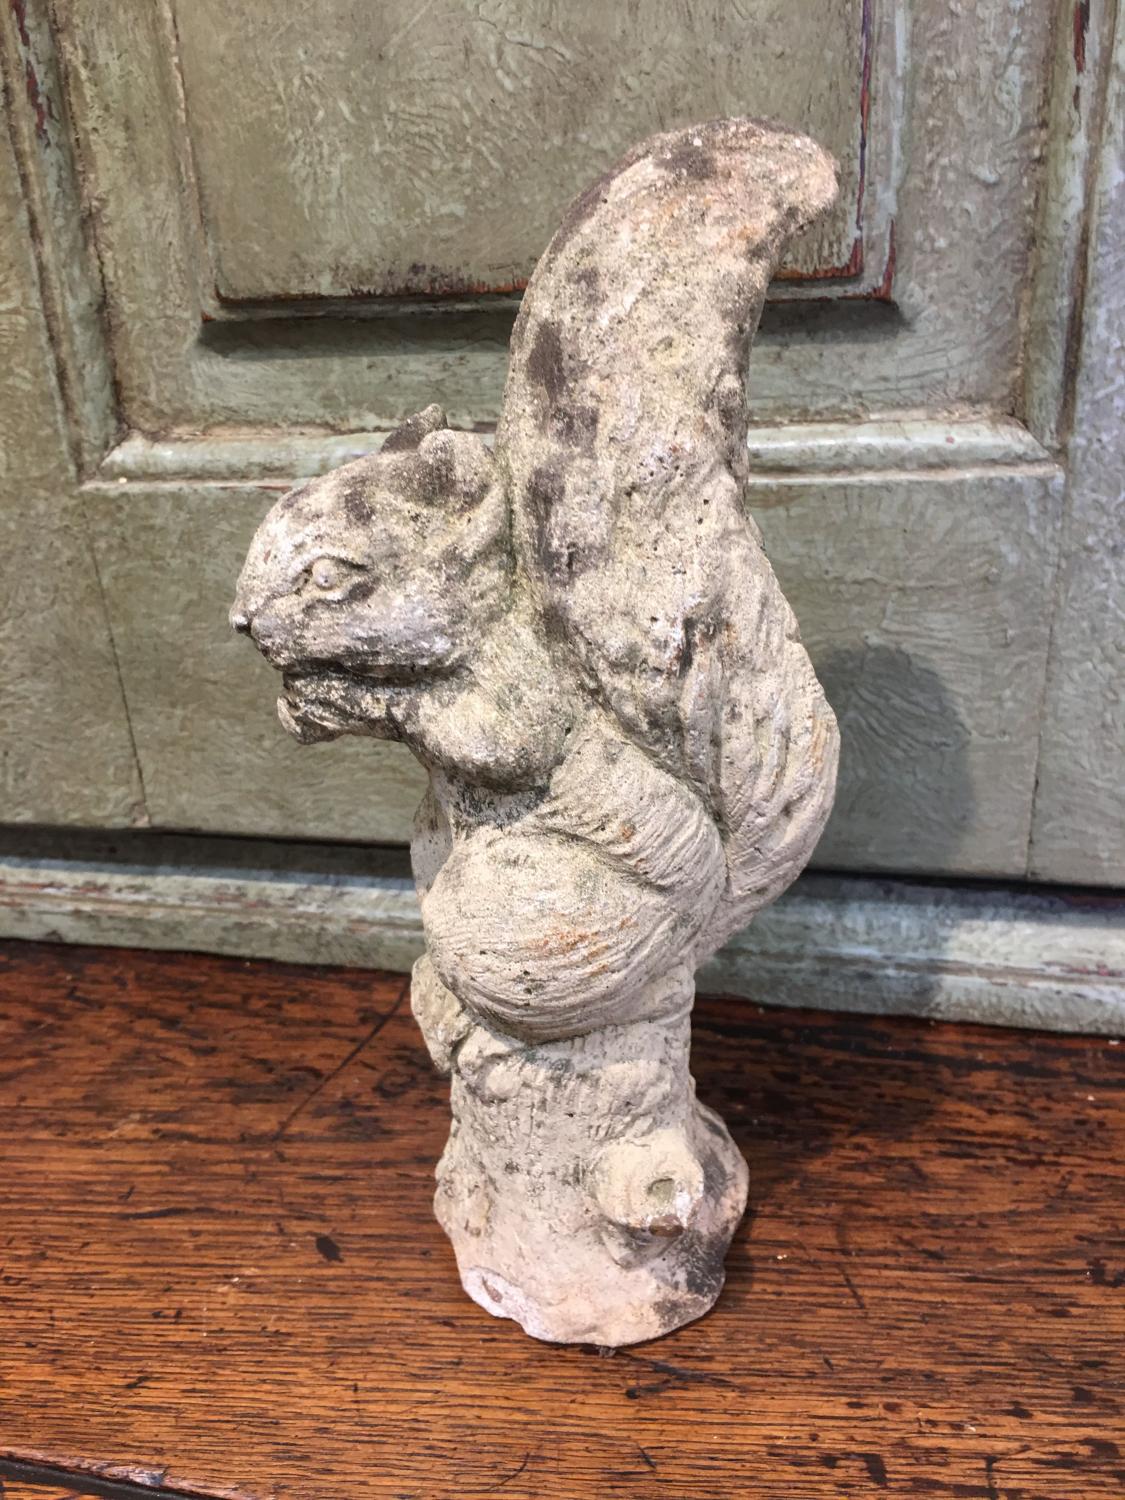 Upright squirrel ornament for garden or home